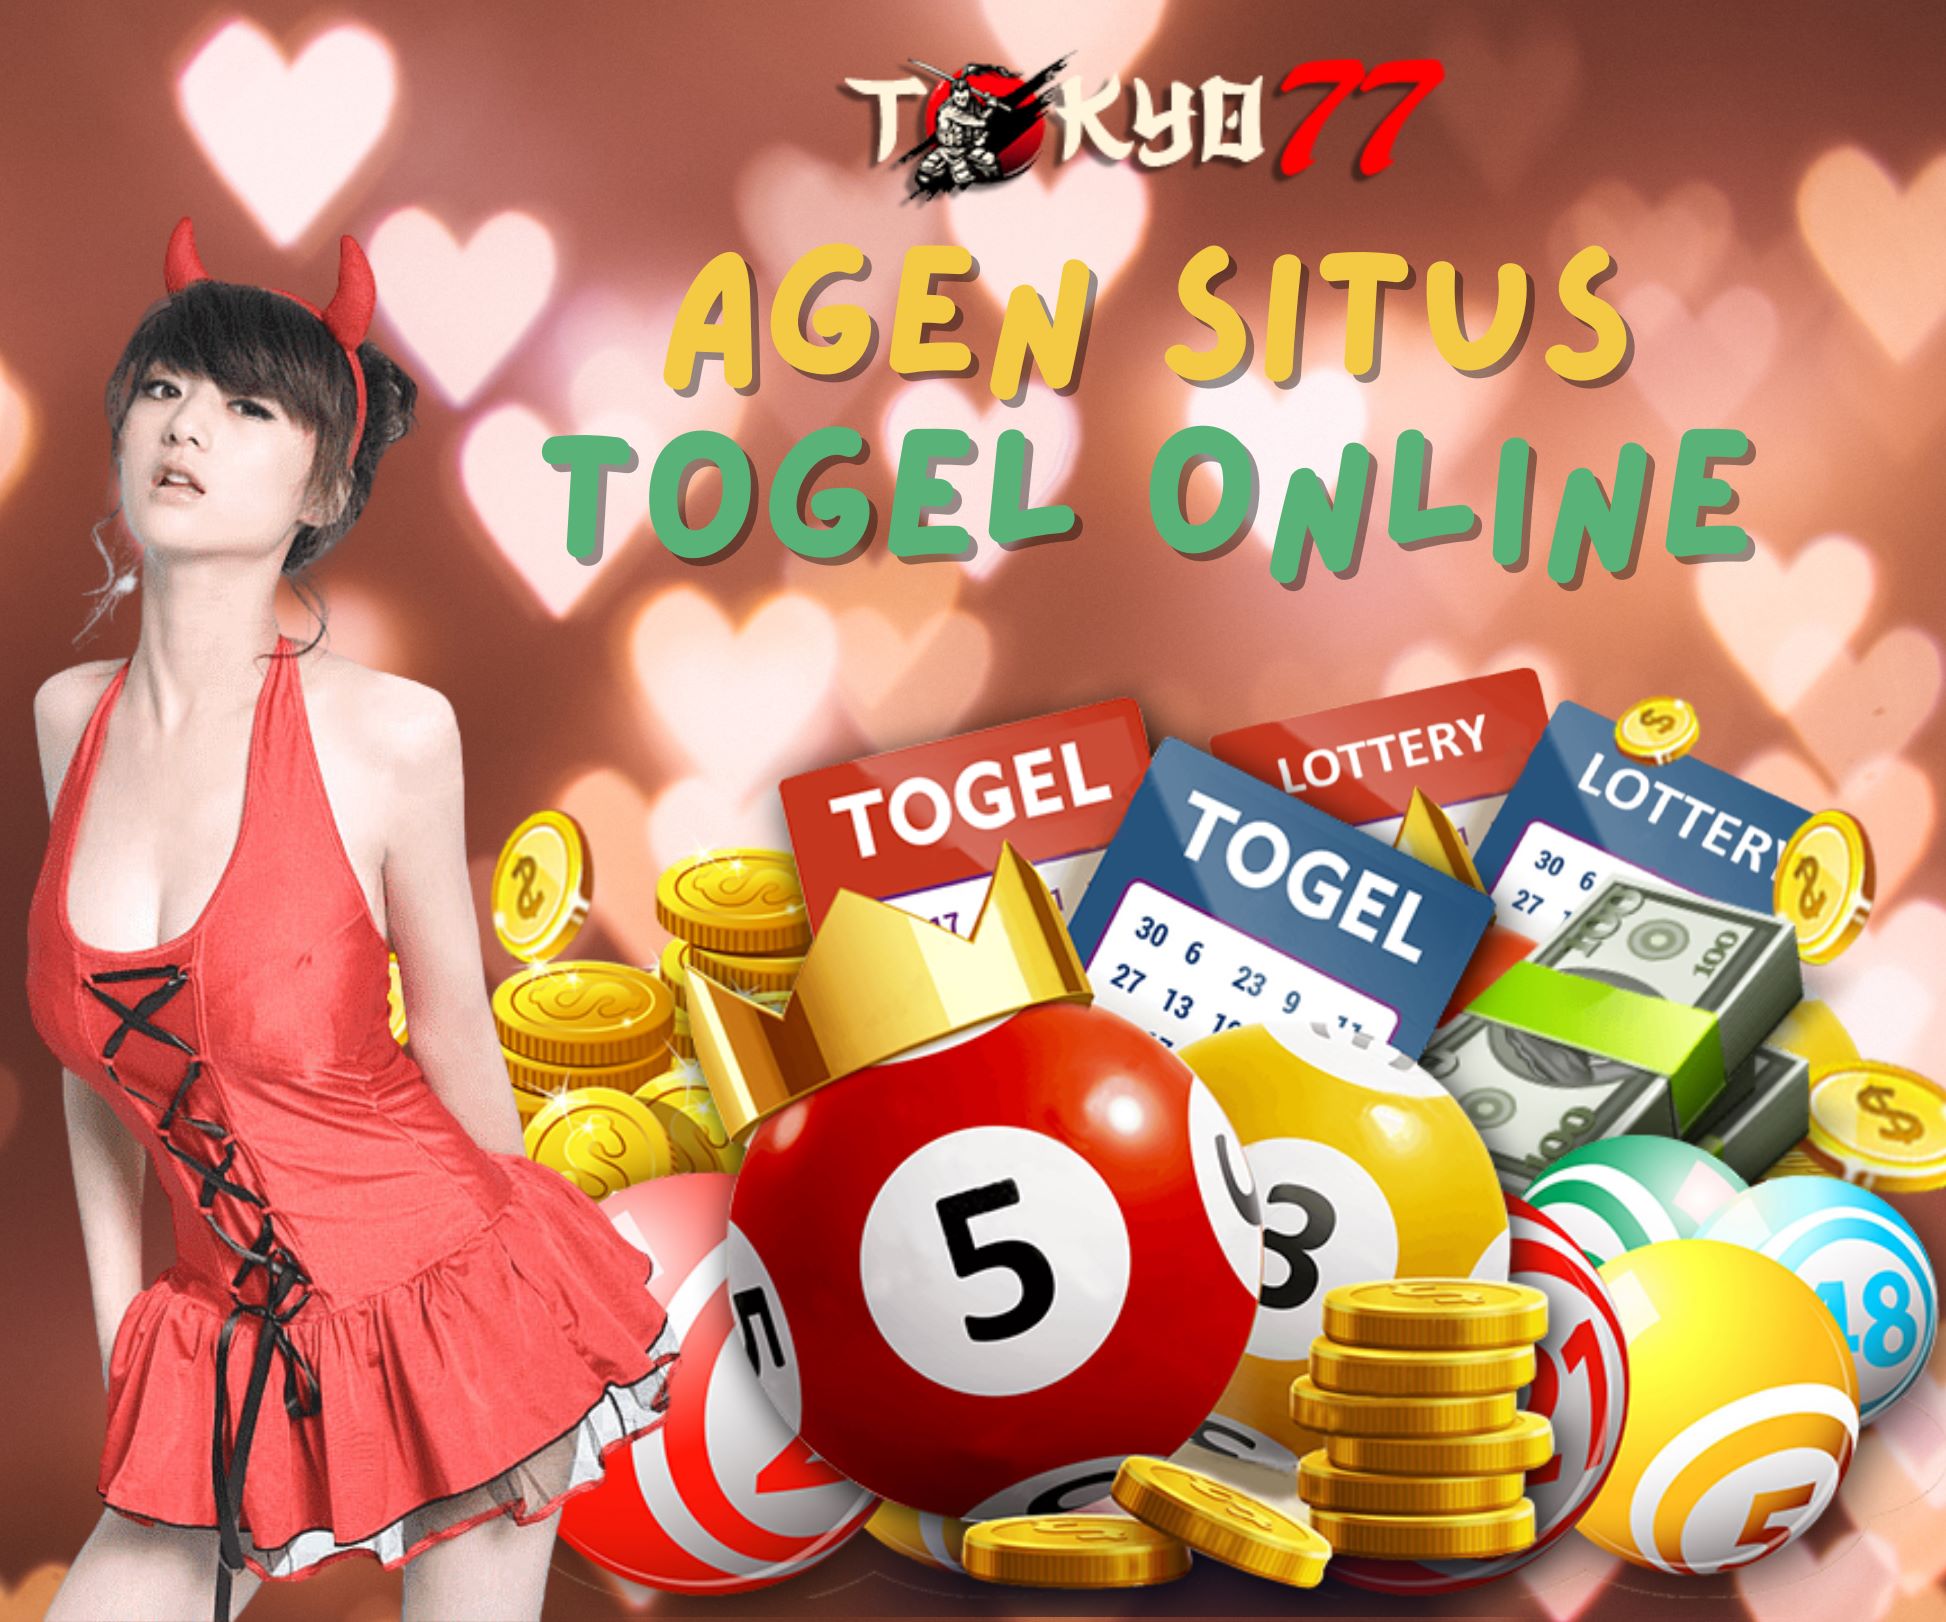 Check your Luck and Place Your Dream Bet on Togel